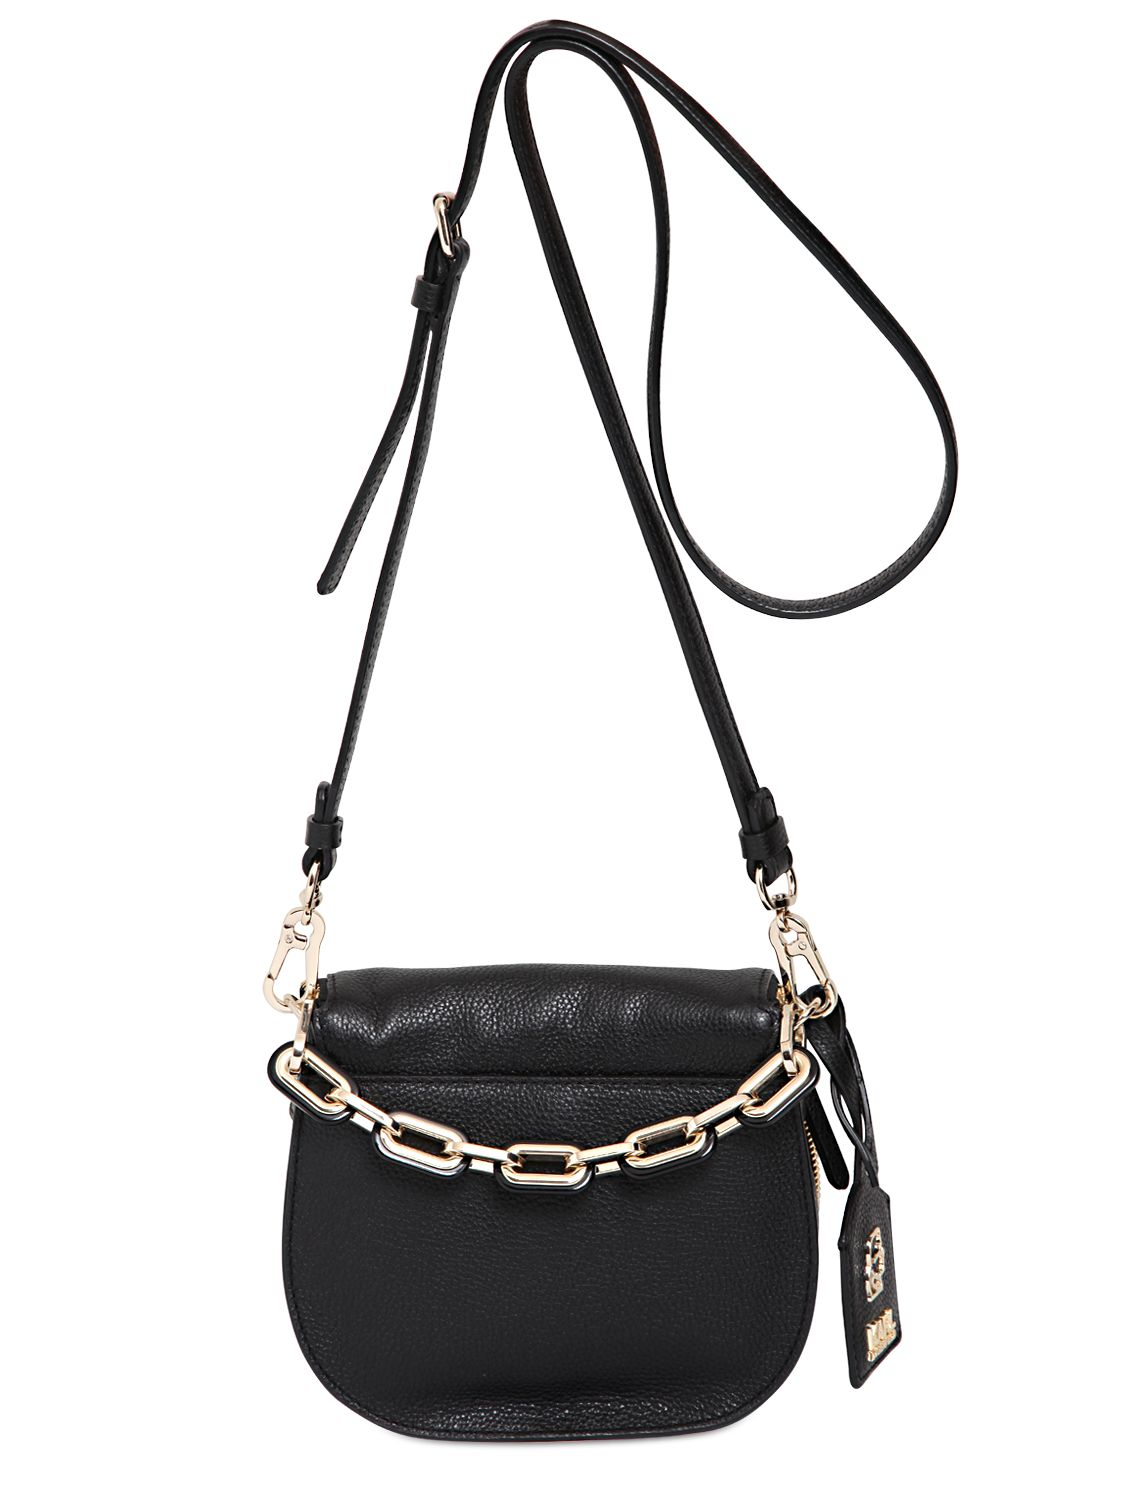 Karl Lagerfeld Small K Grained Leather Shoulder Bag in Black - Lyst